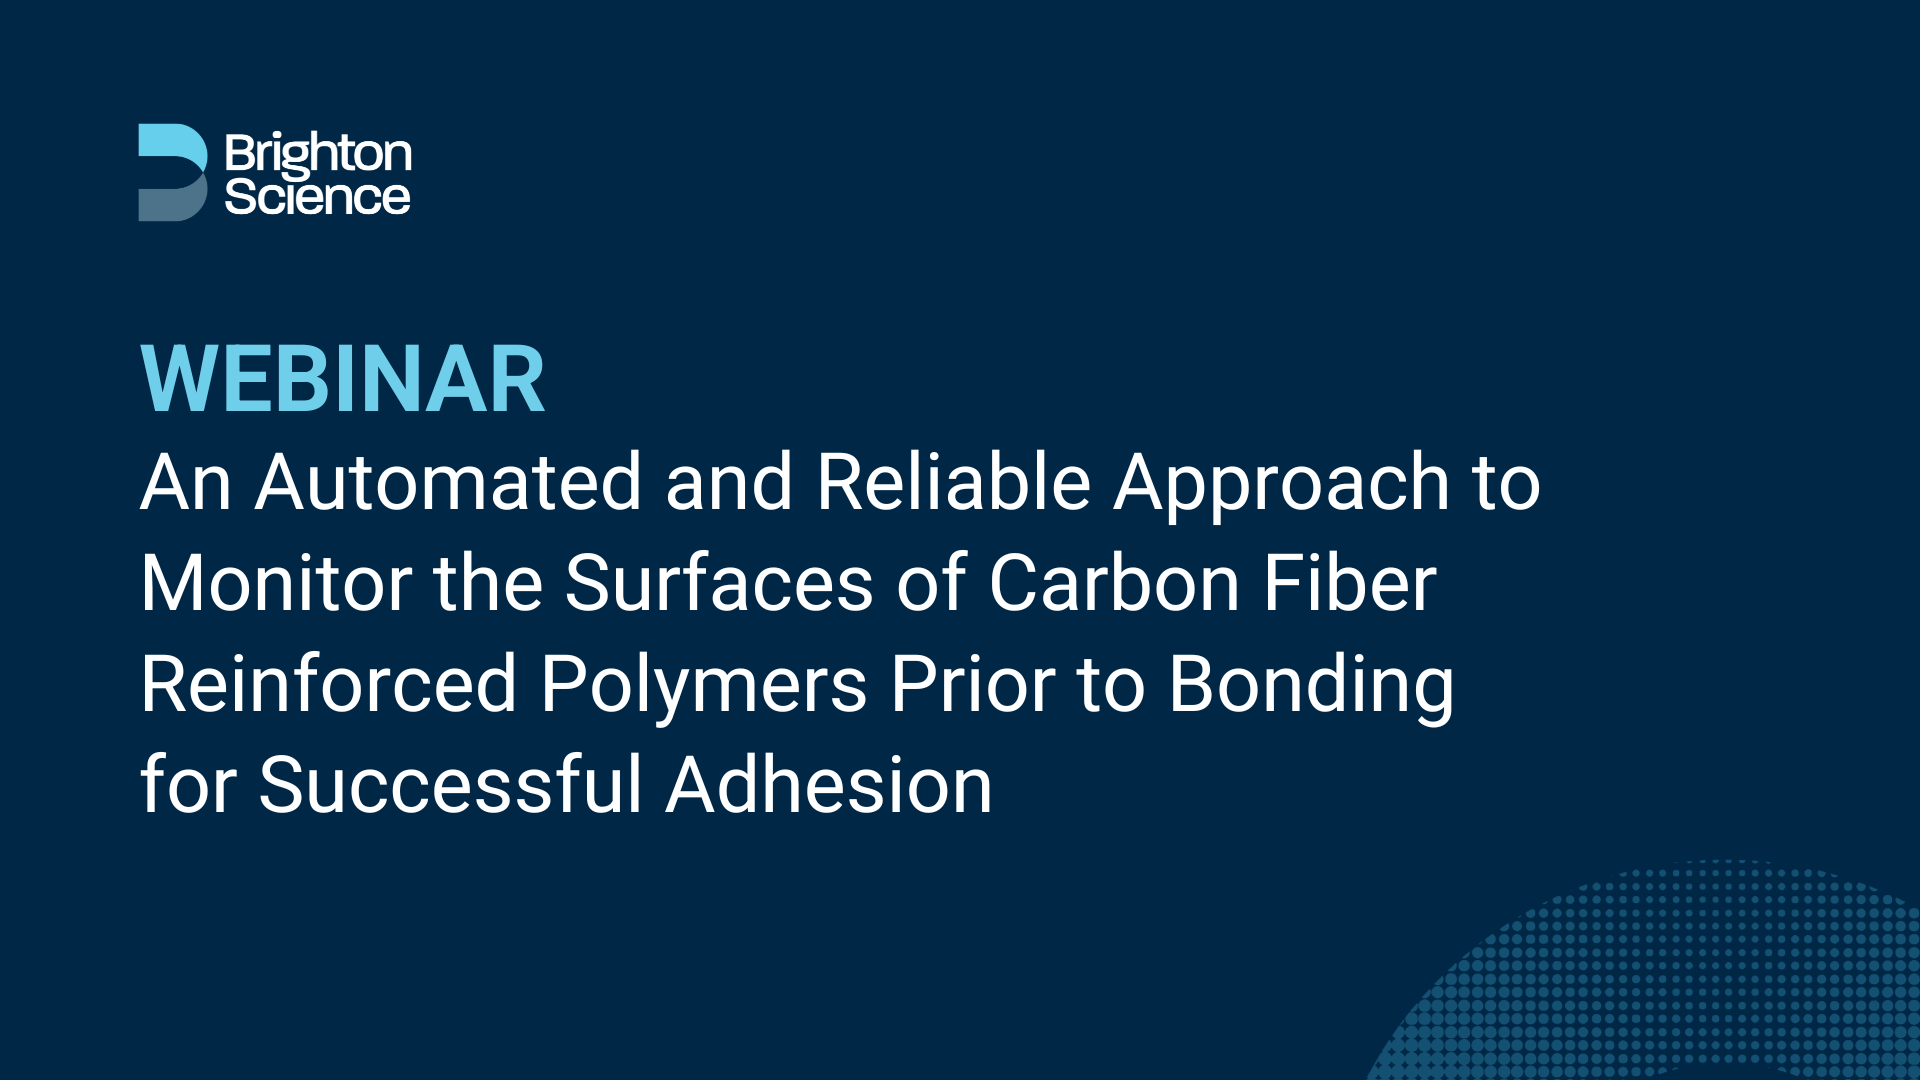 Webinar: Automated and Reliable Approach to Monitor the Surfaces of Carbon Fiber Reinforced Polymers Prior to Bonding for Successful Adhesion